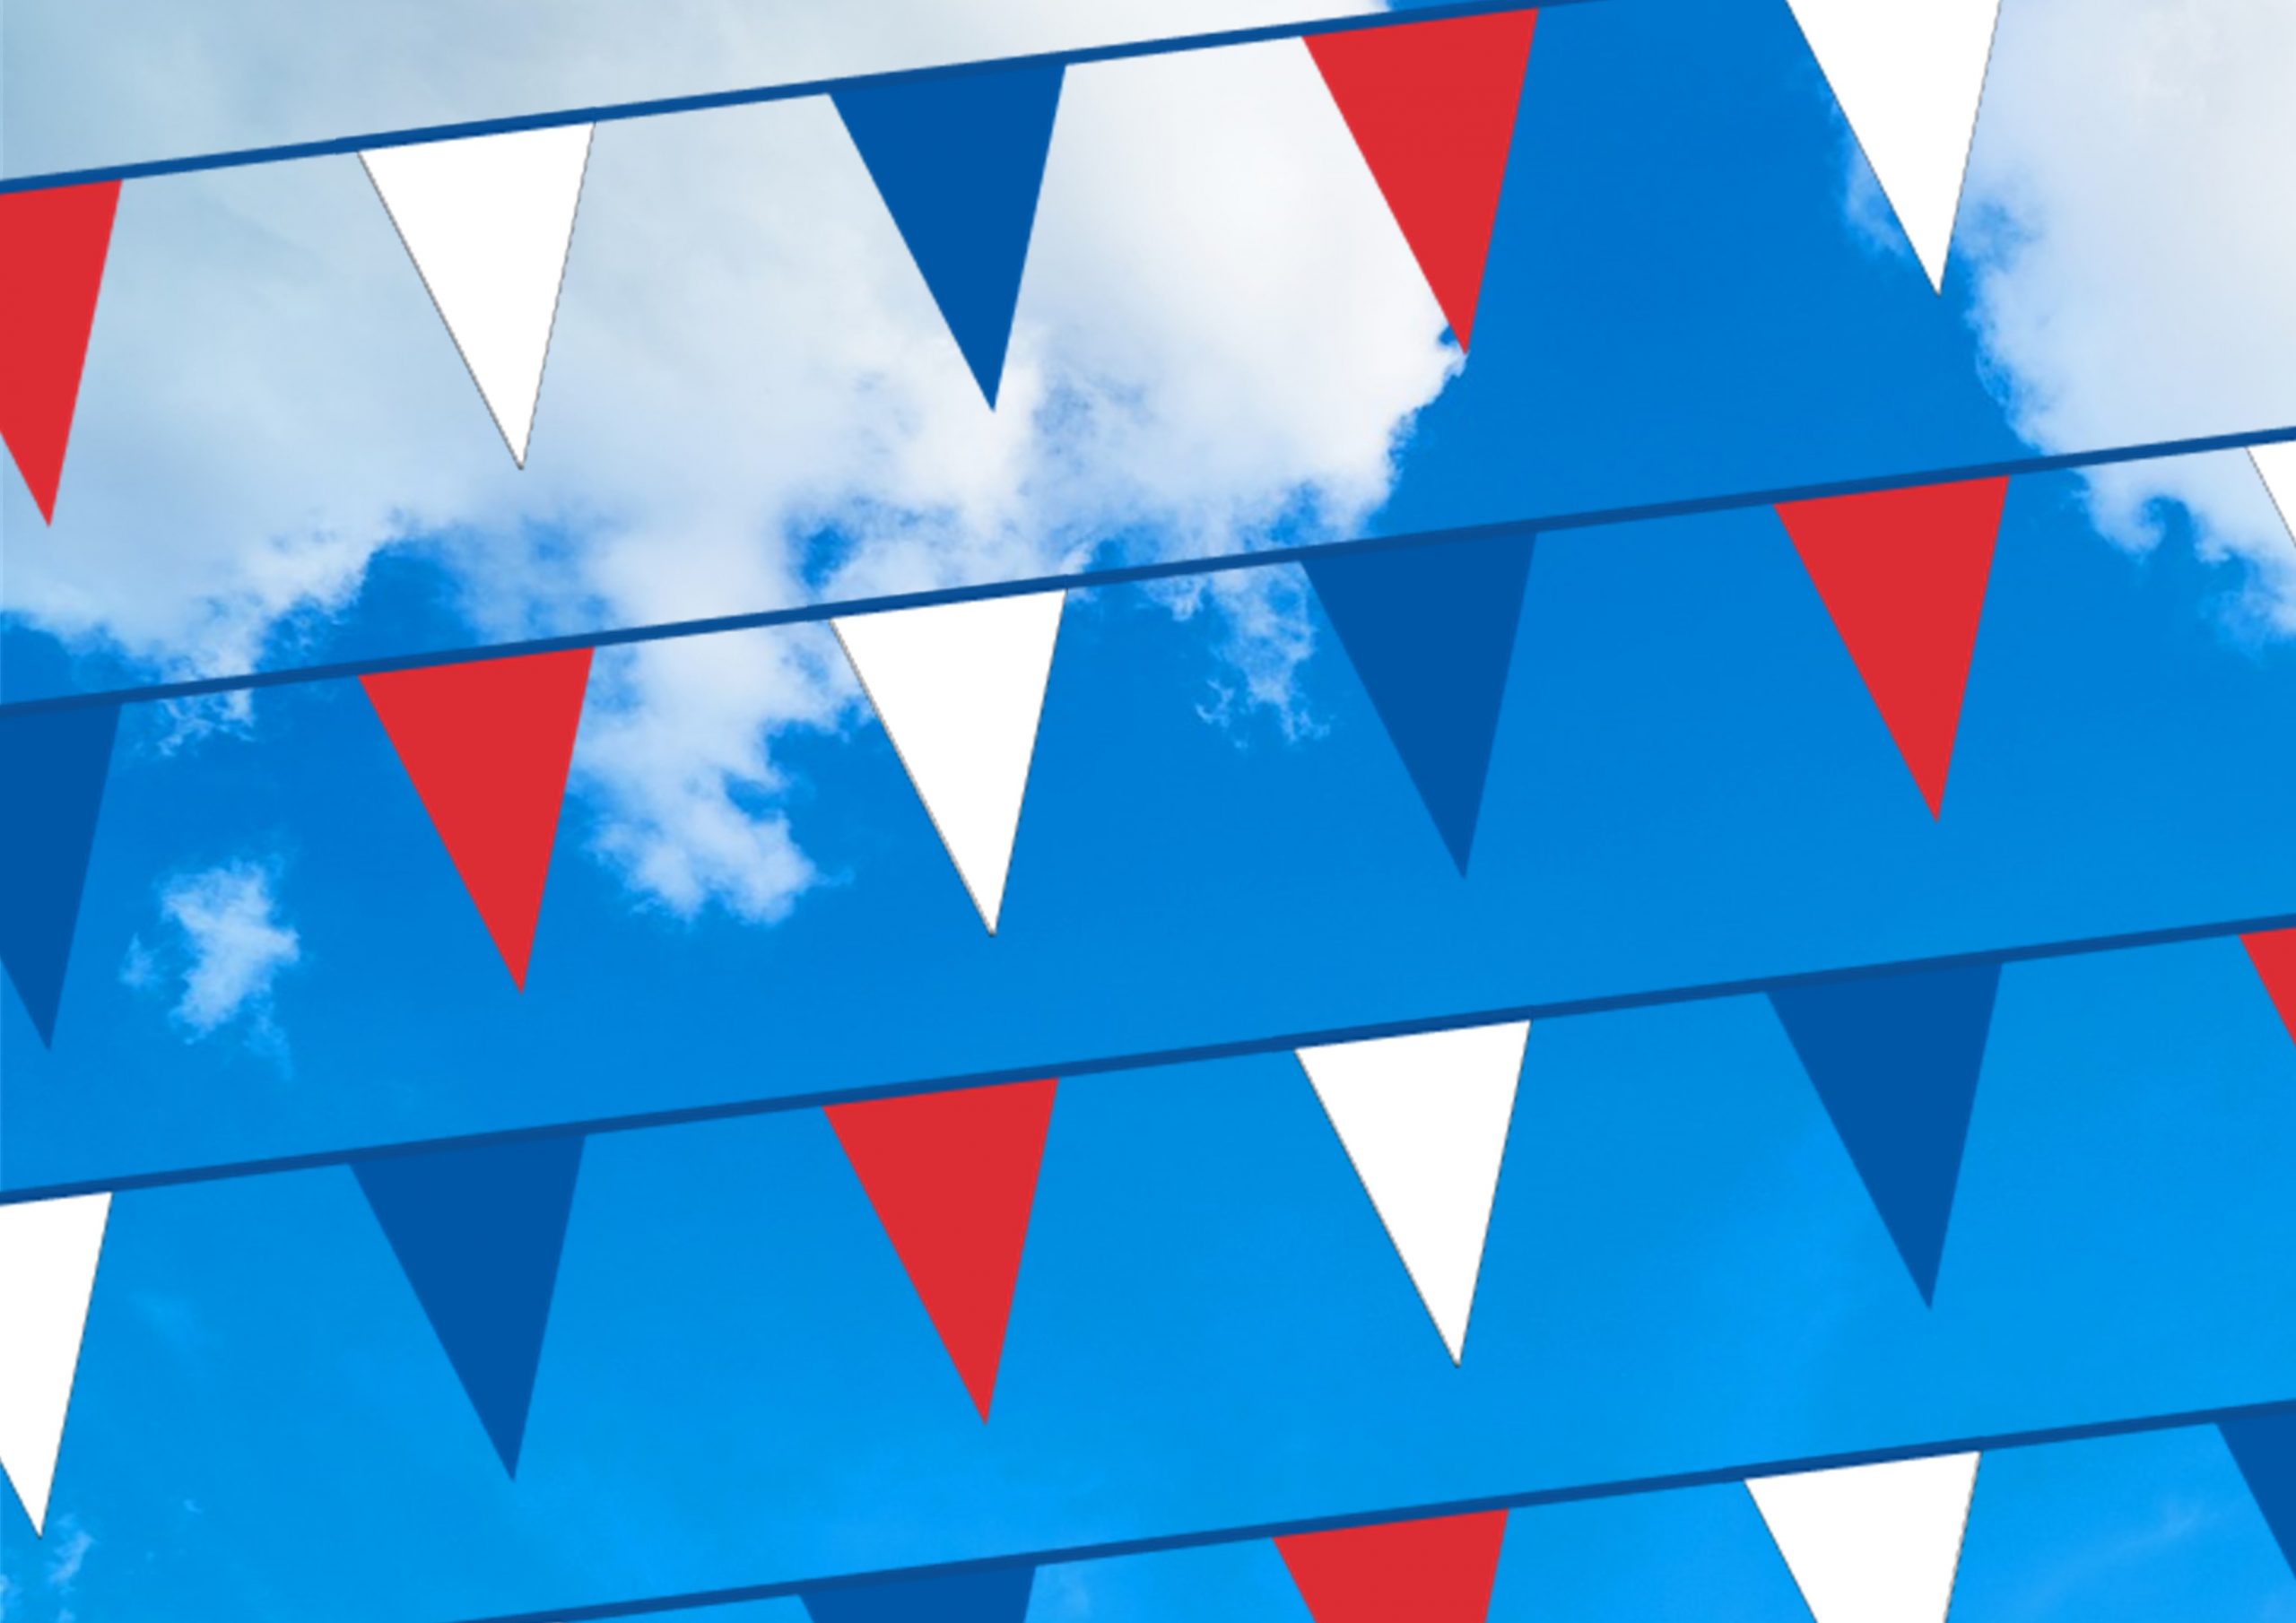 Red, white and blue bunting against a blue sky with white clouds